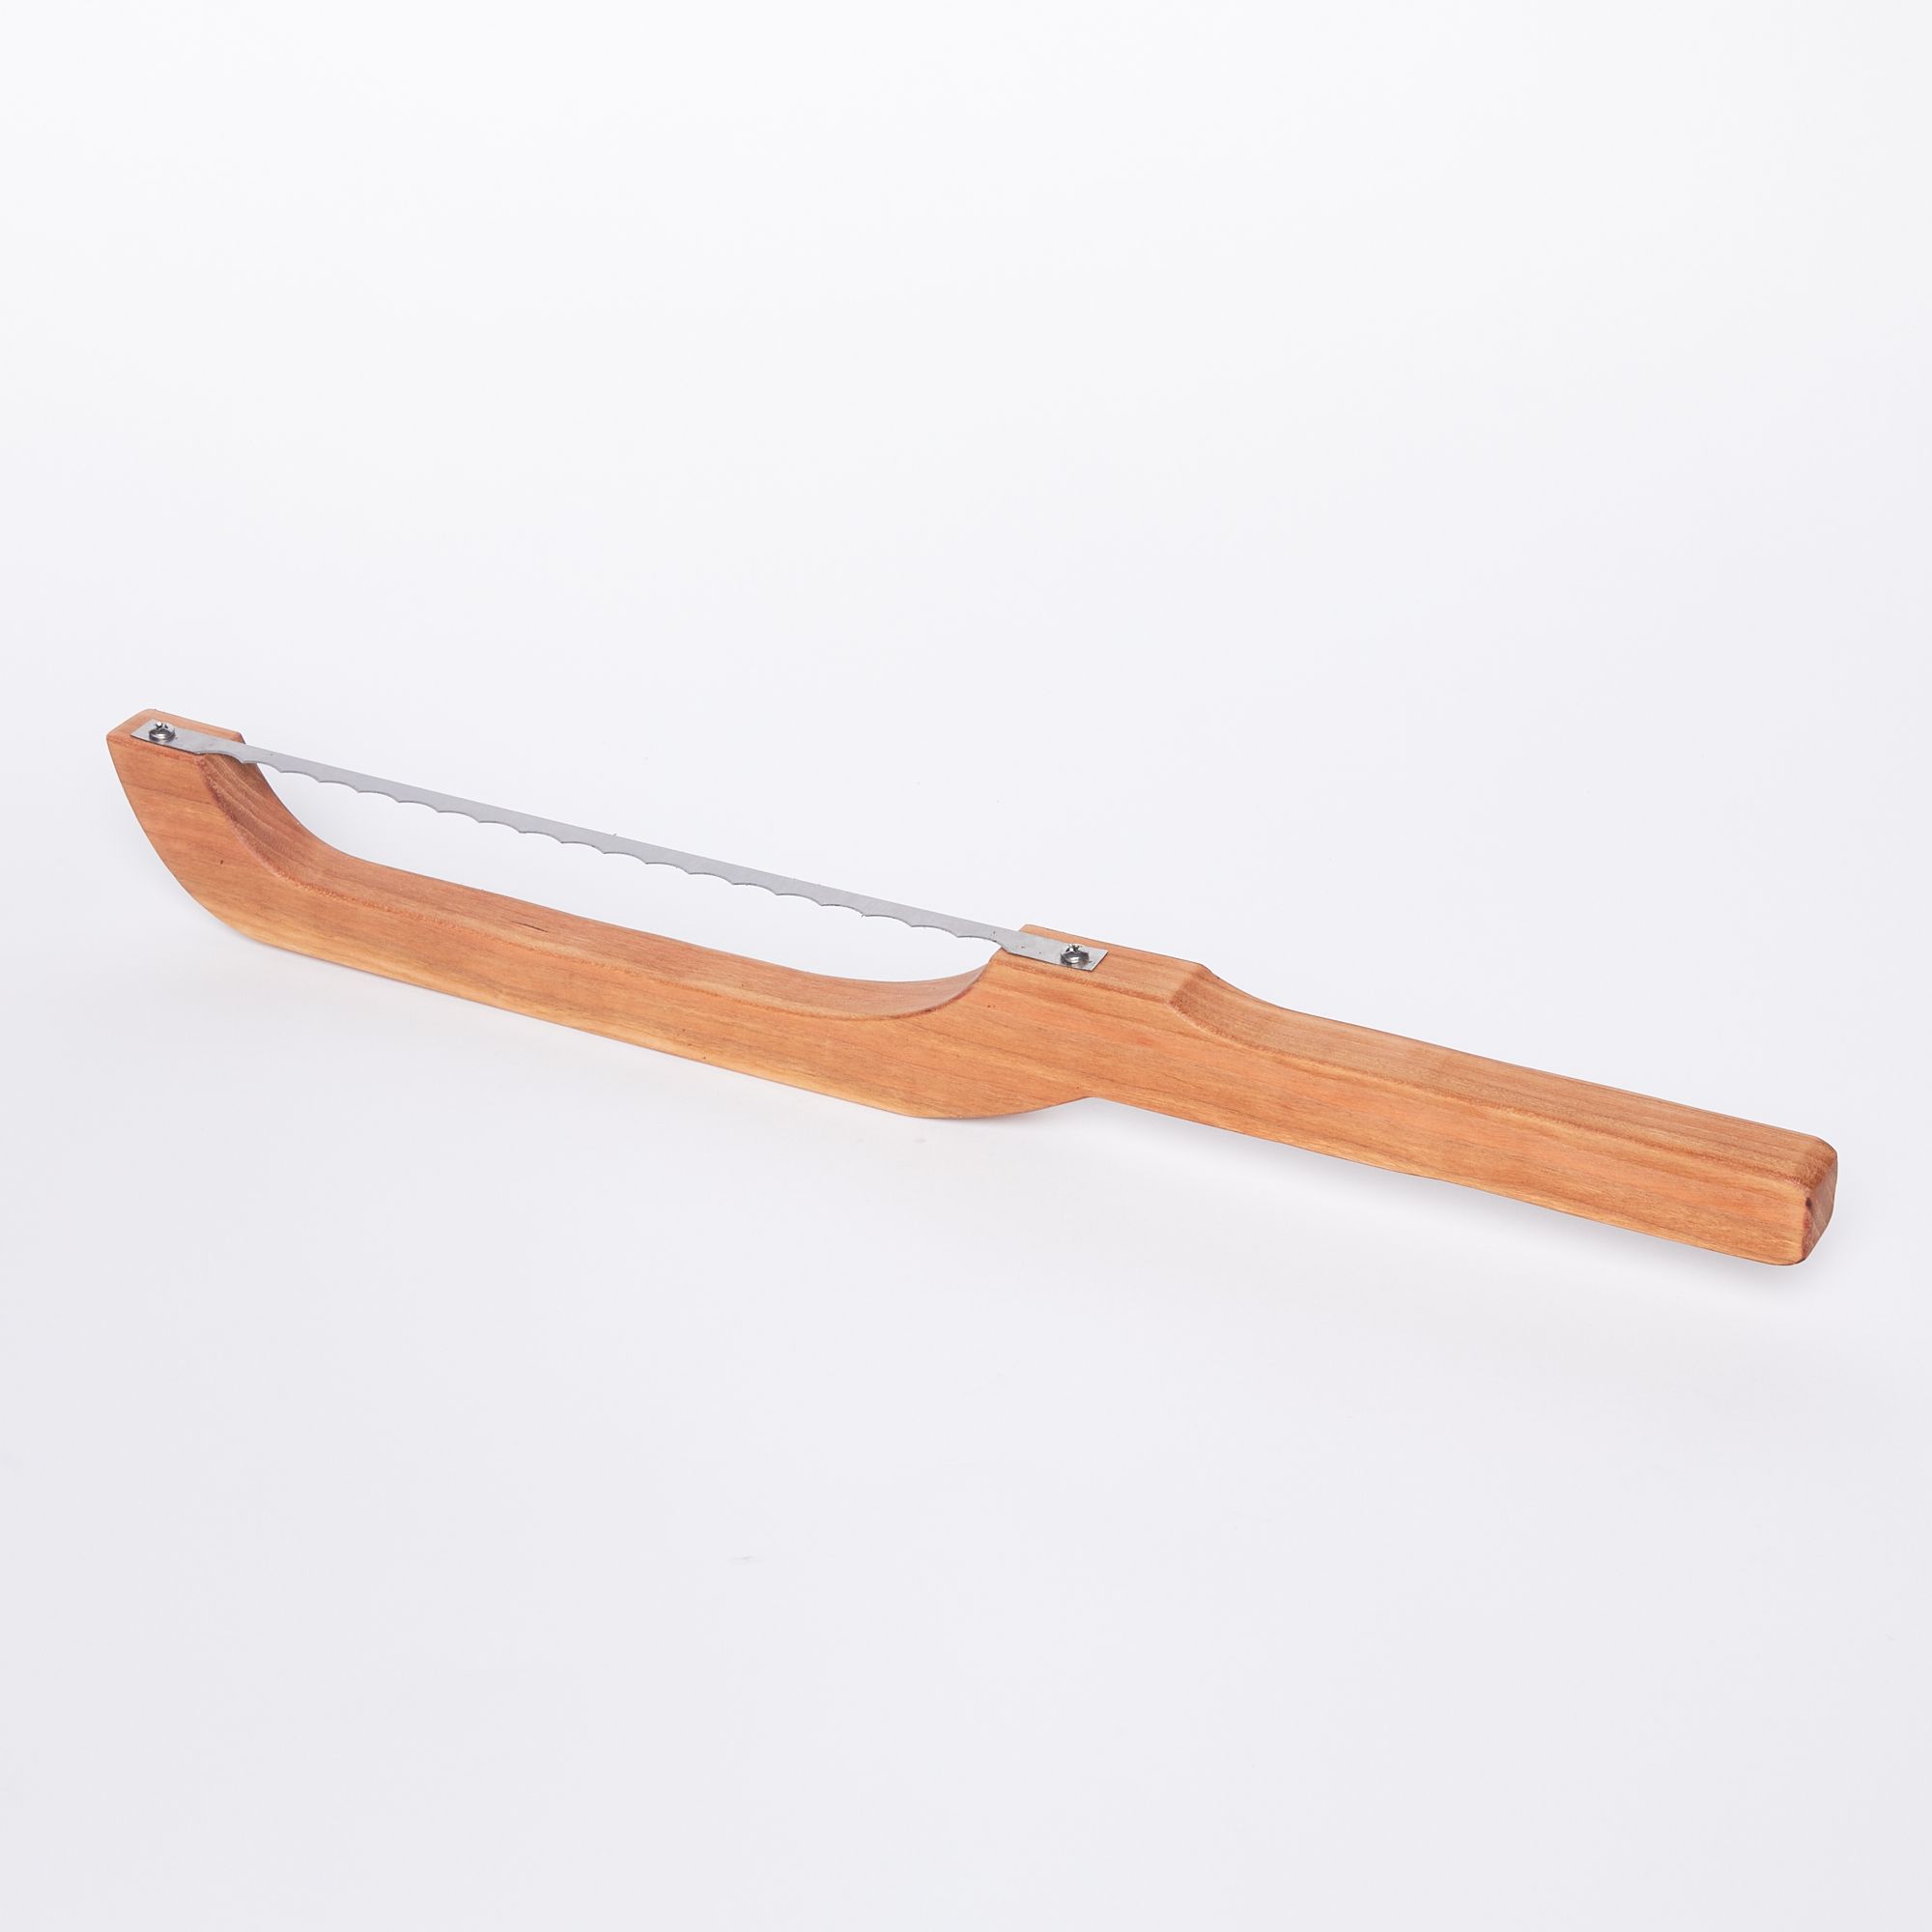 A wooden bread bow, which has a metal blade that span between curved ends of the handle, on a white background